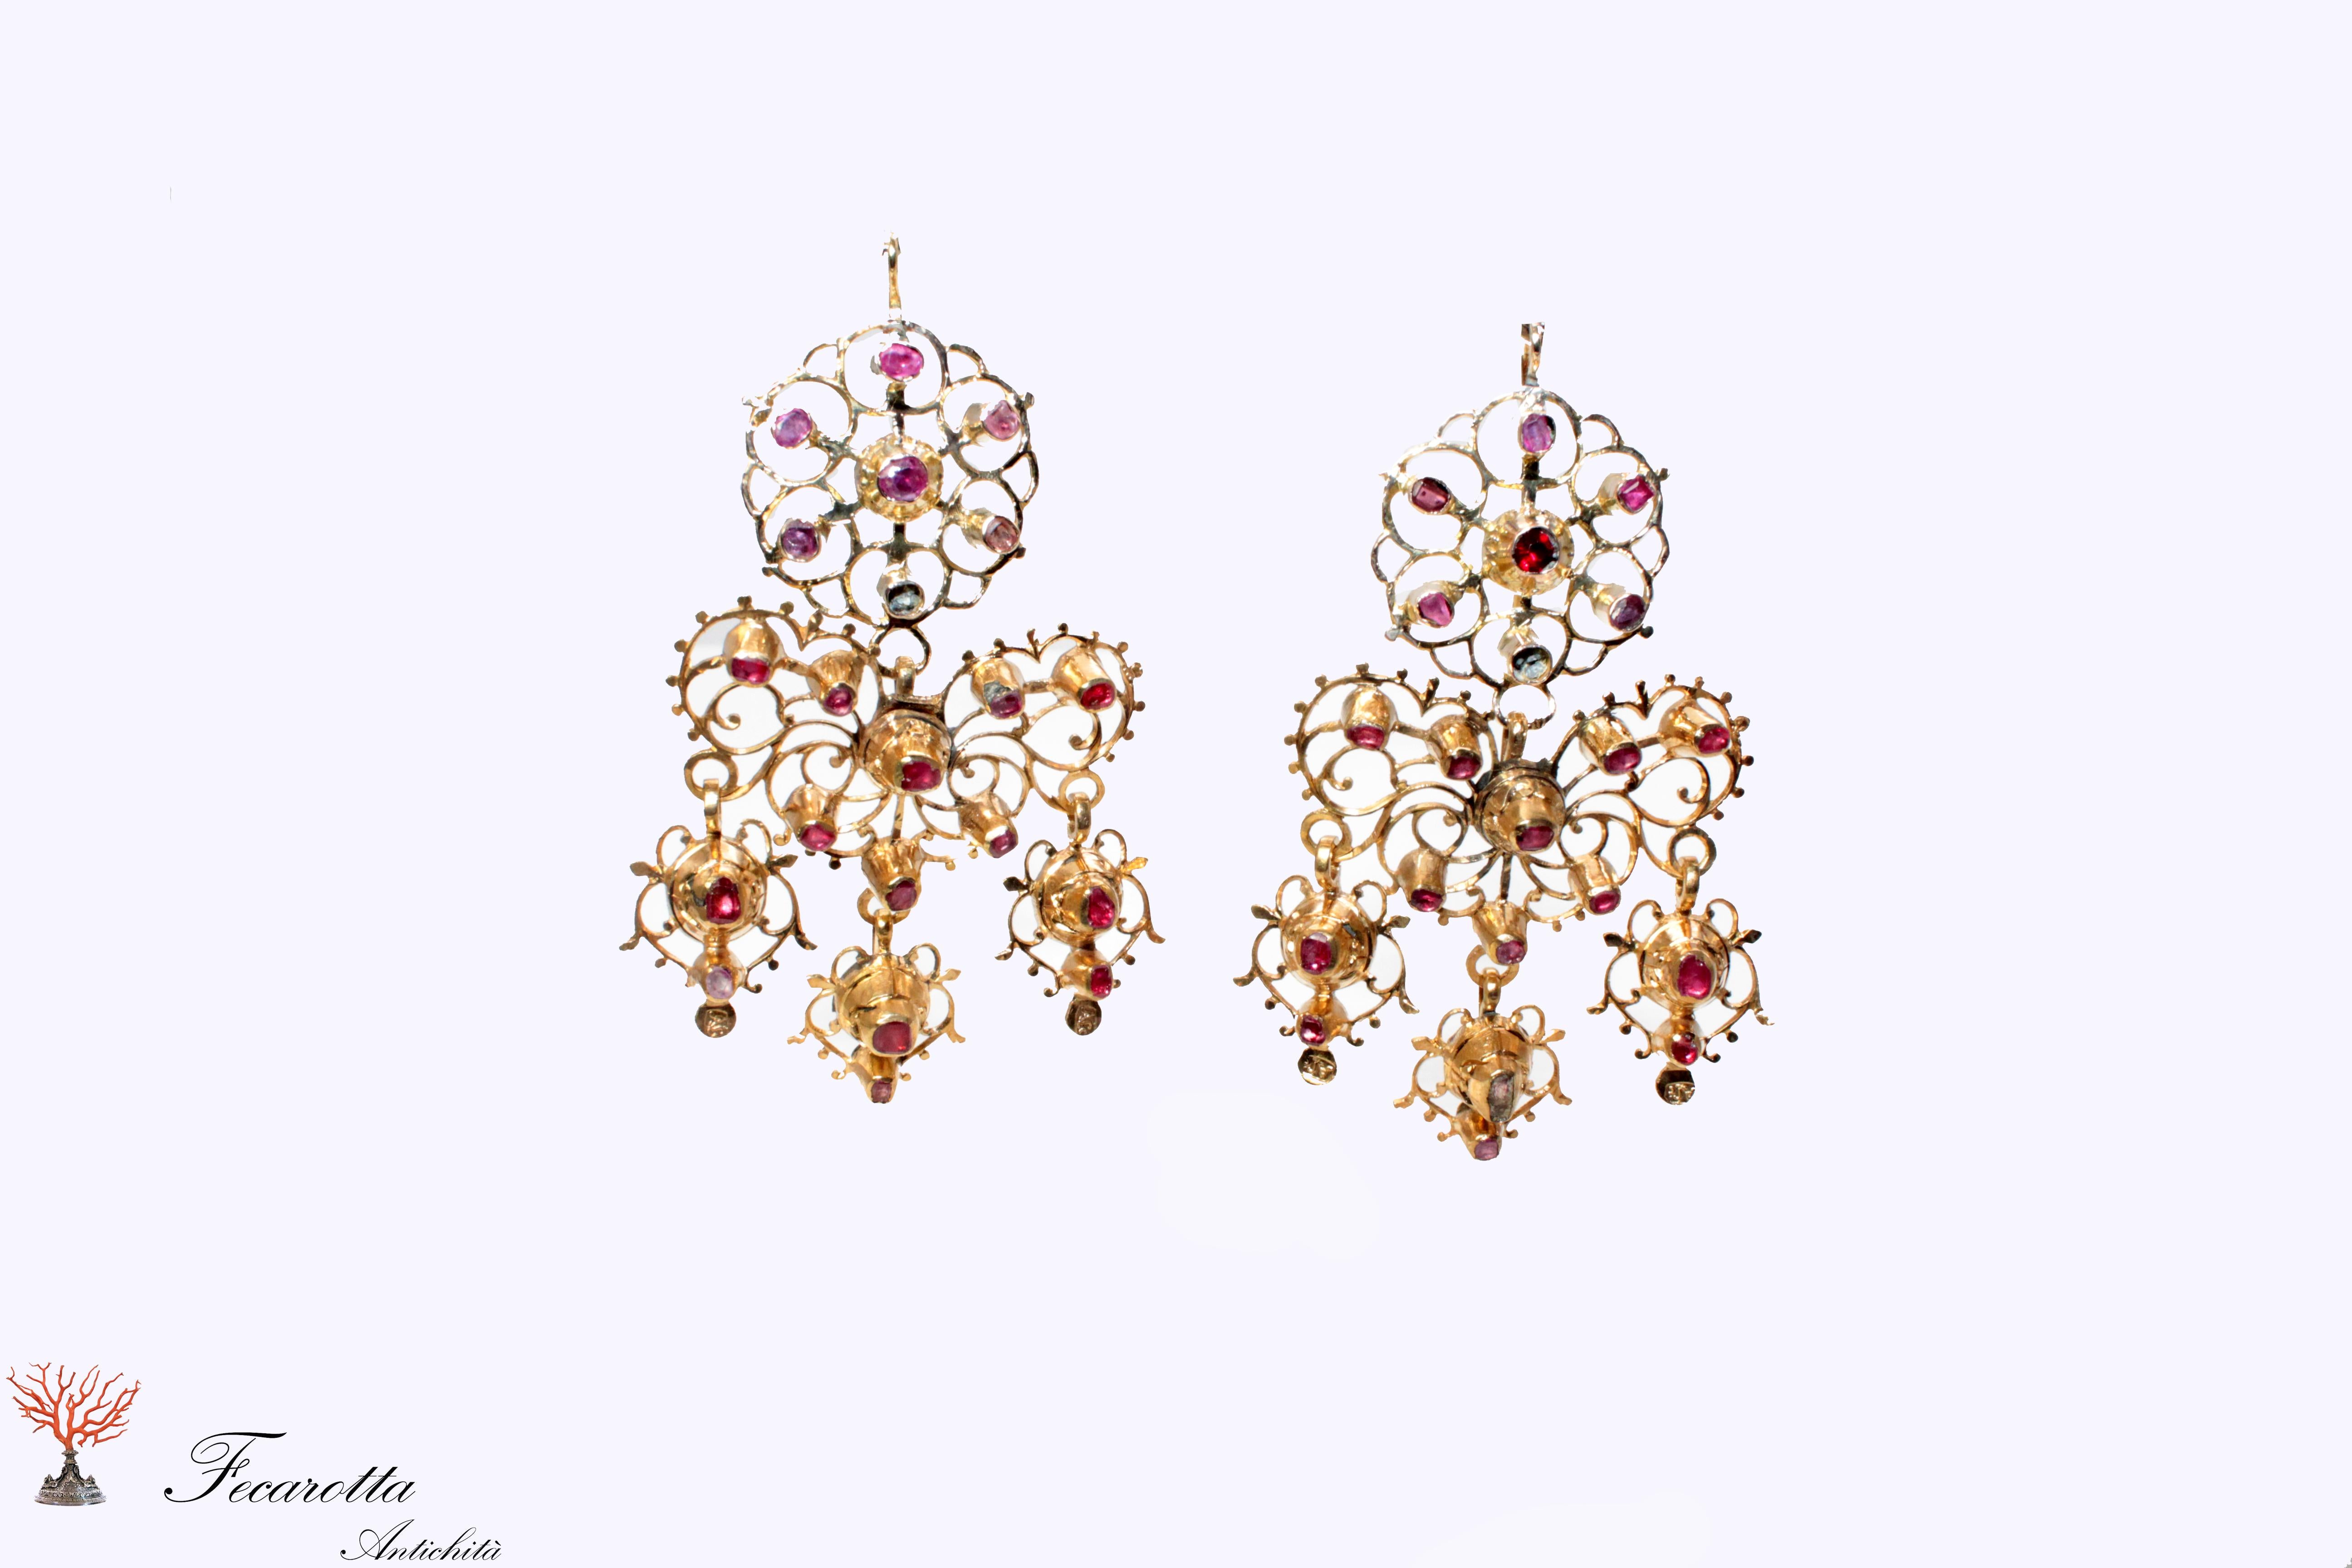 Sicilian earrings from the 18th century gold 14 kt ruby ​​.Marked with punches of small size on the bridge and on every part of the earrings.Object of a unique and extraordinary beauty and rarity, difficult to find in today's market, very rare